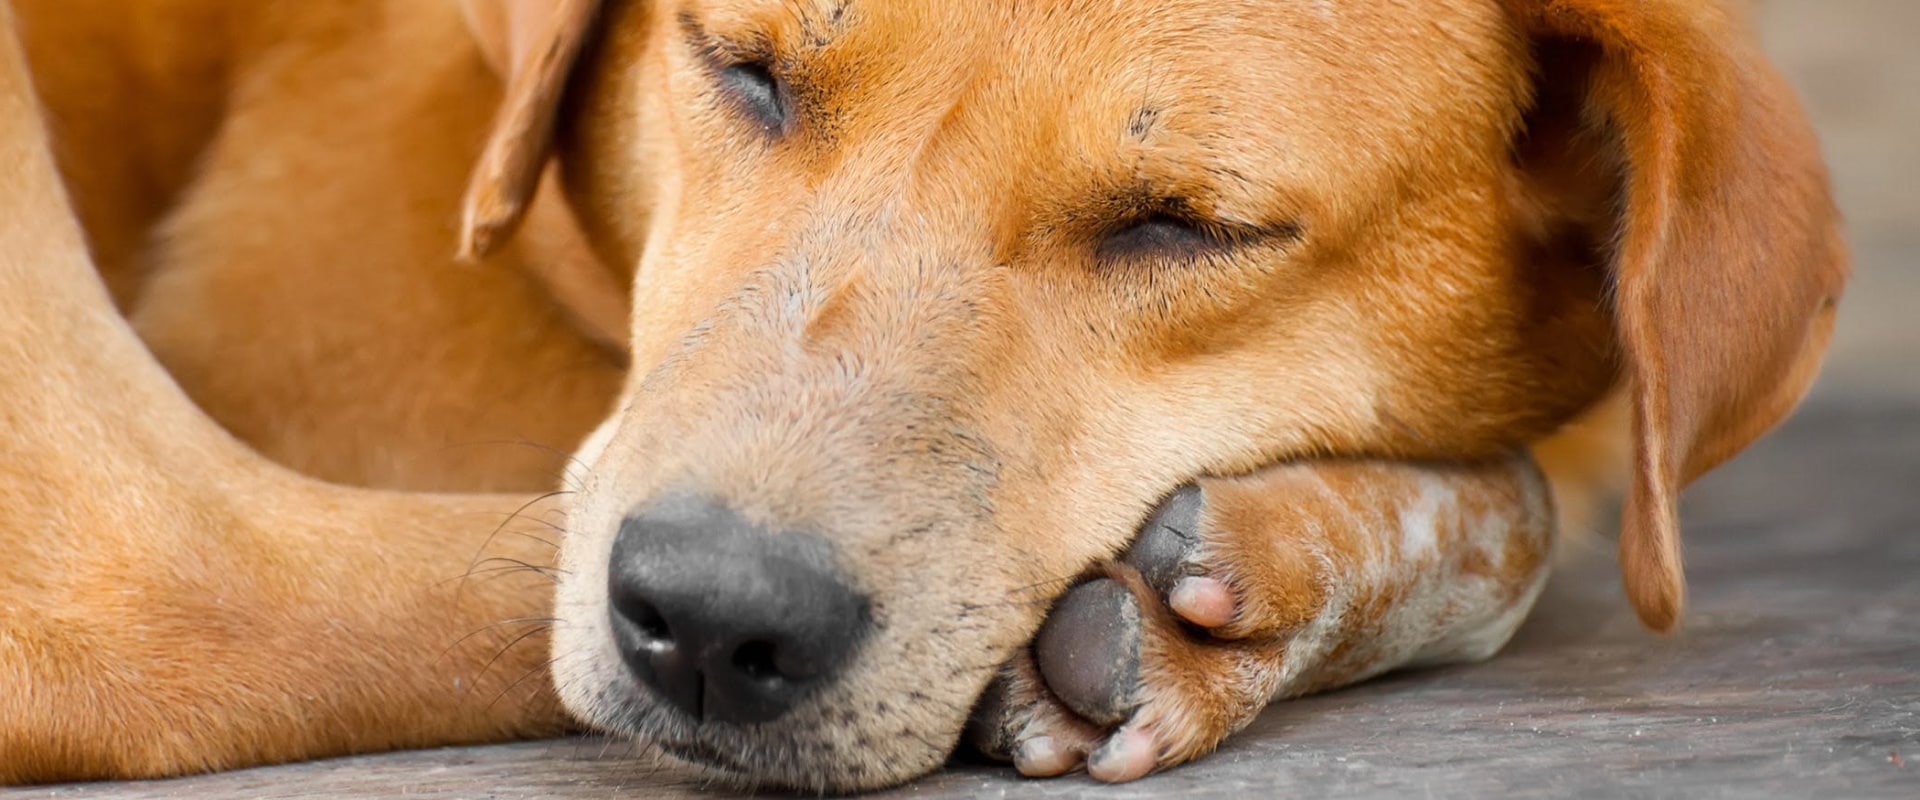 signs of internal trauma in dogs